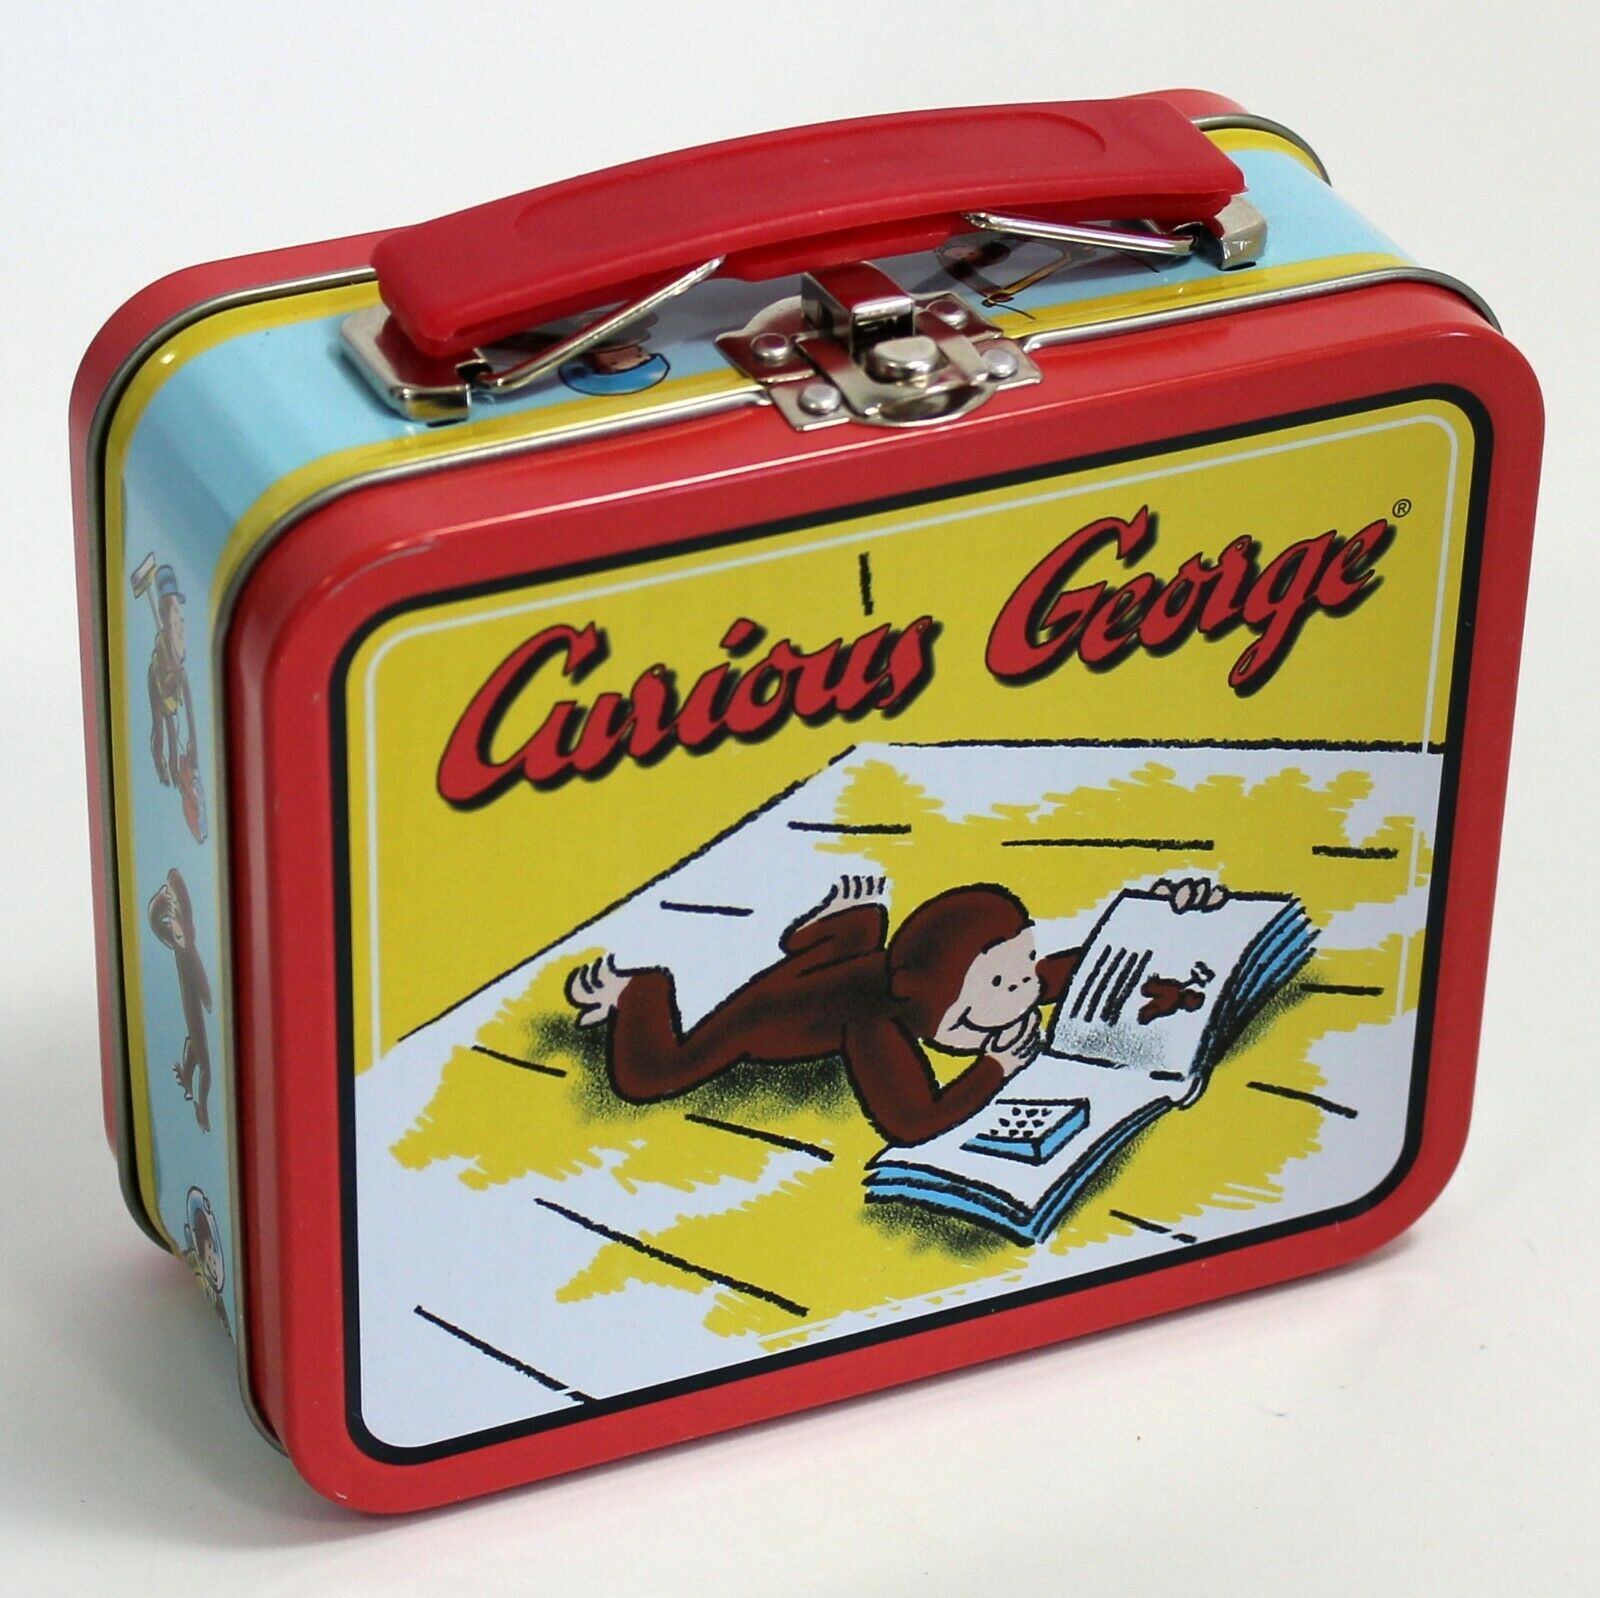 Curious George Mini Lunch Box, Metal, Reading A Book, Universal Studios, 5.5x4.5